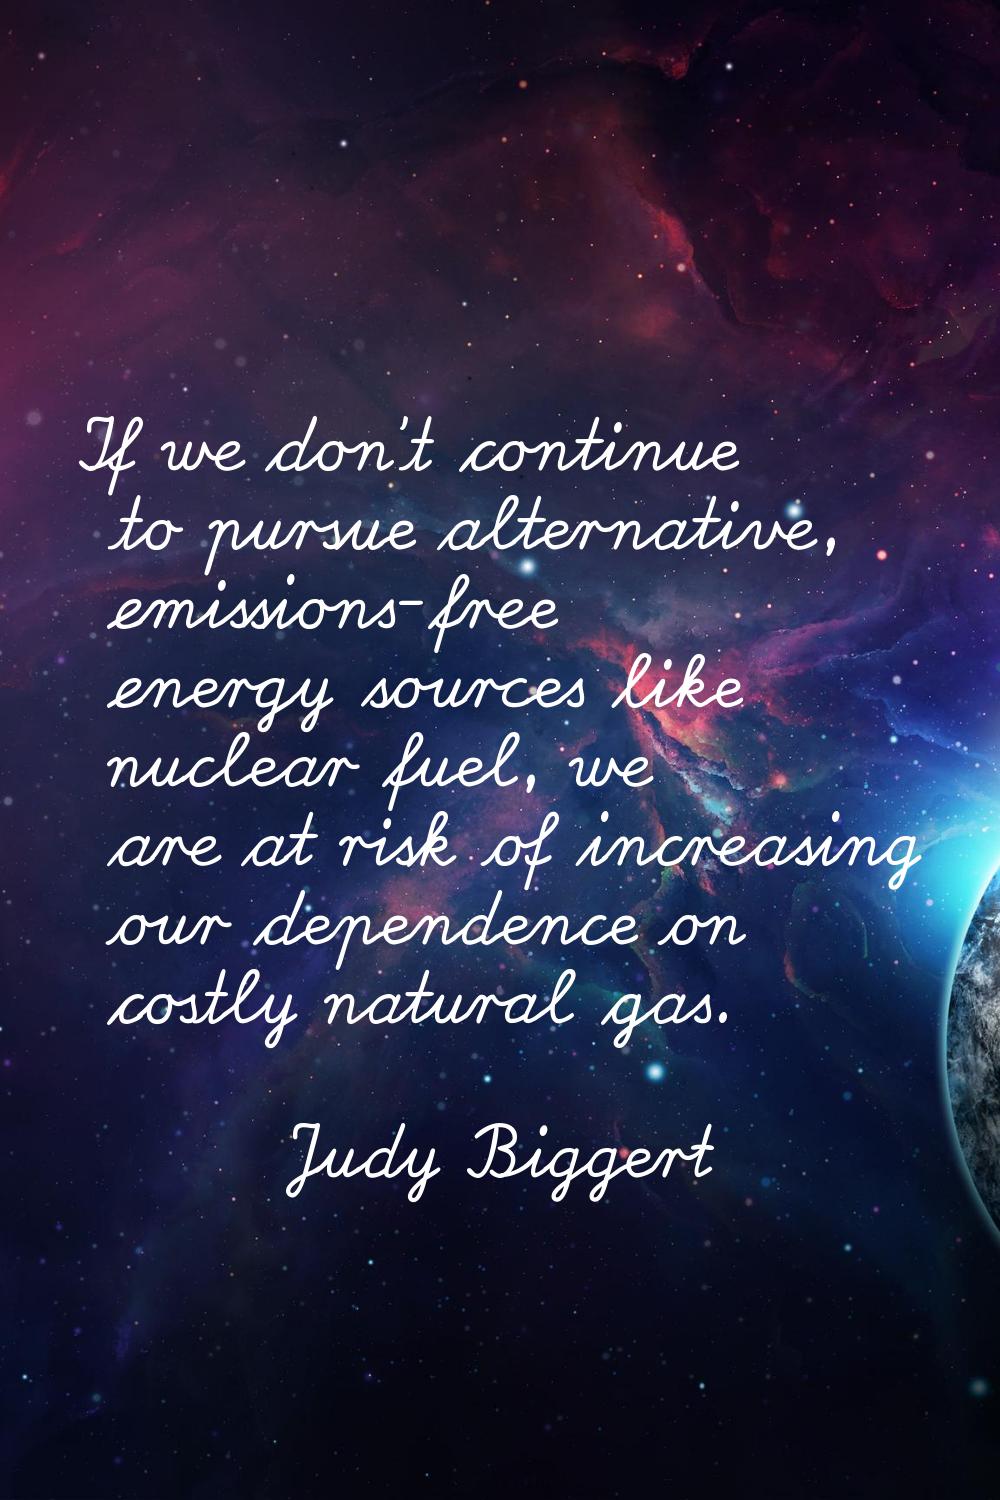 If we don't continue to pursue alternative, emissions-free energy sources like nuclear fuel, we are